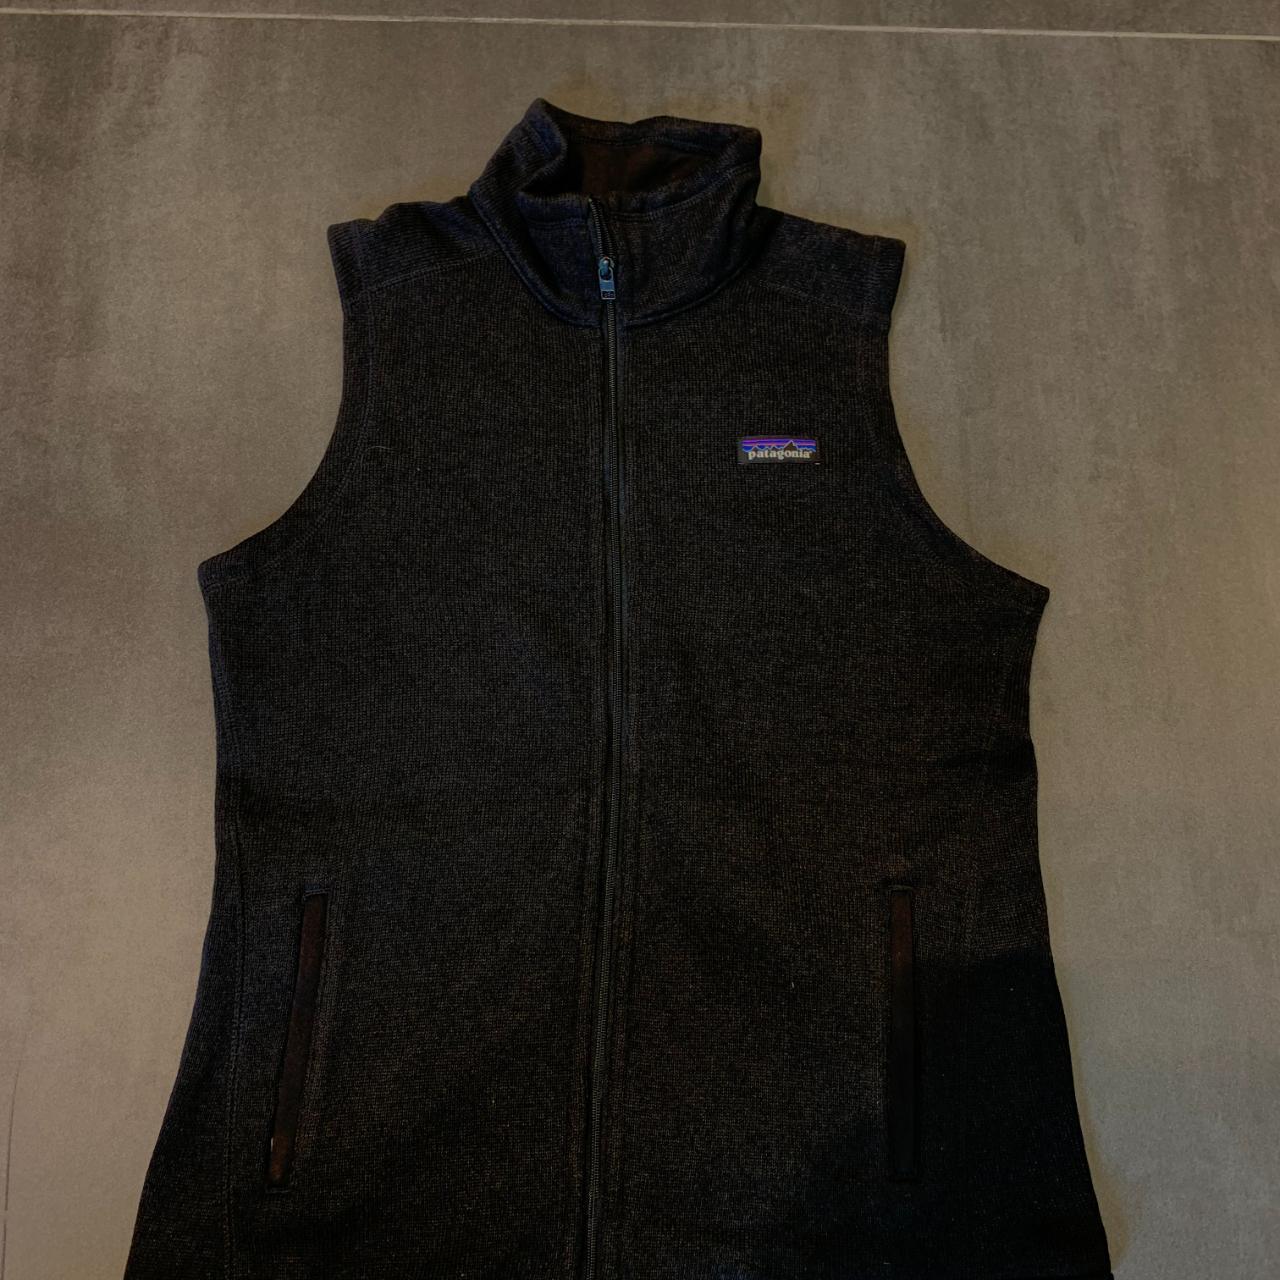 Patagonia black fleece vest with embroidery on the... - Depop